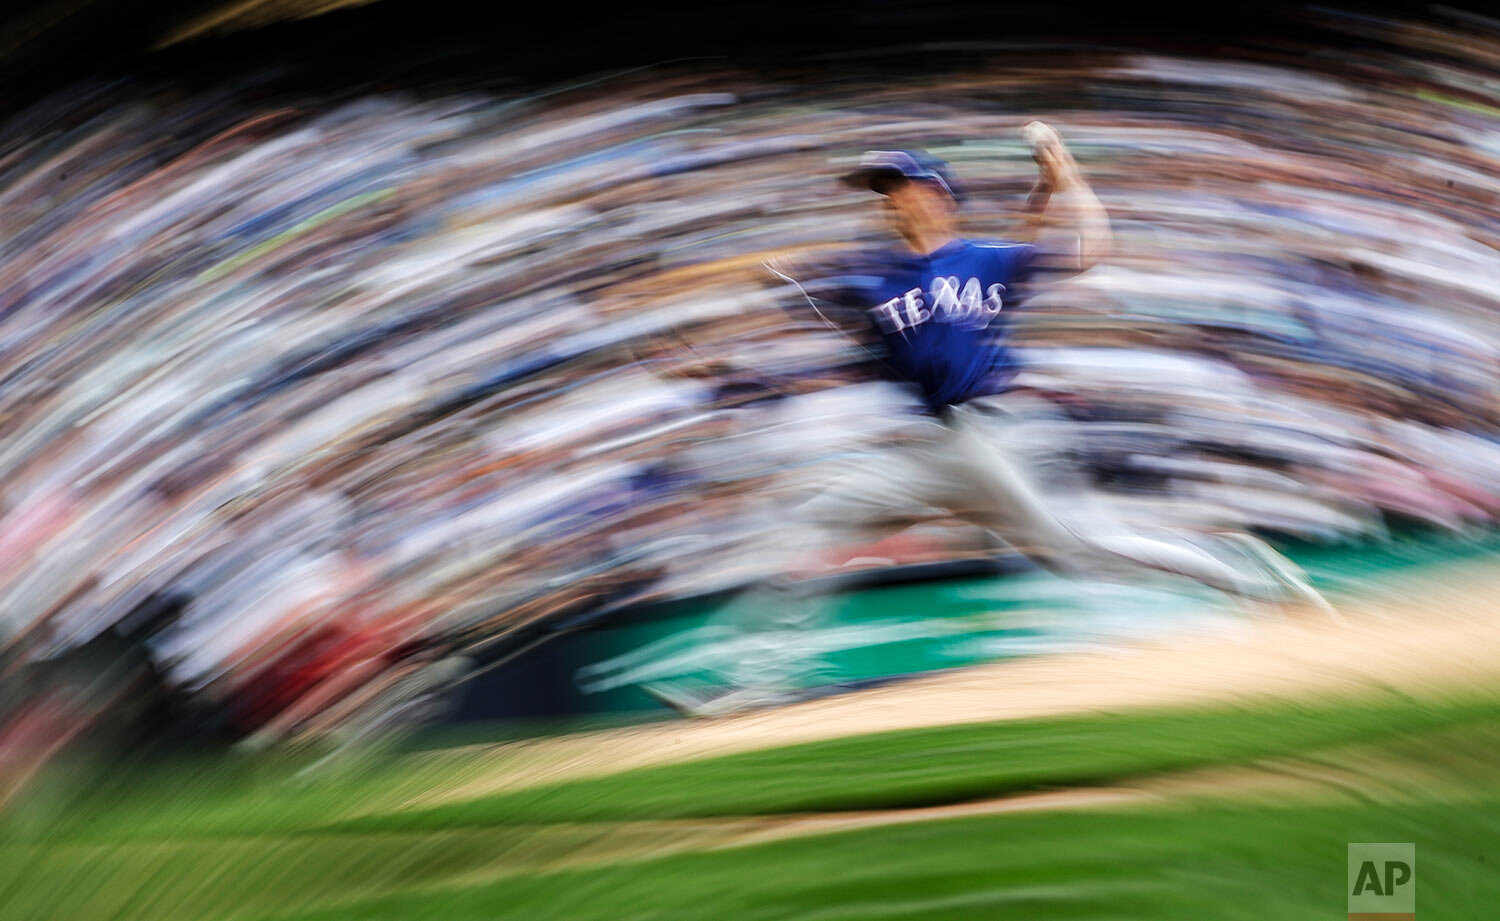  Texas Rangers starting pitcher Mike Minor throws during the seventh inning of a baseball game against the Milwaukee Brewers on Aug. 11, 2019, in Milwaukee. (AP Photo/Morry Gash) 